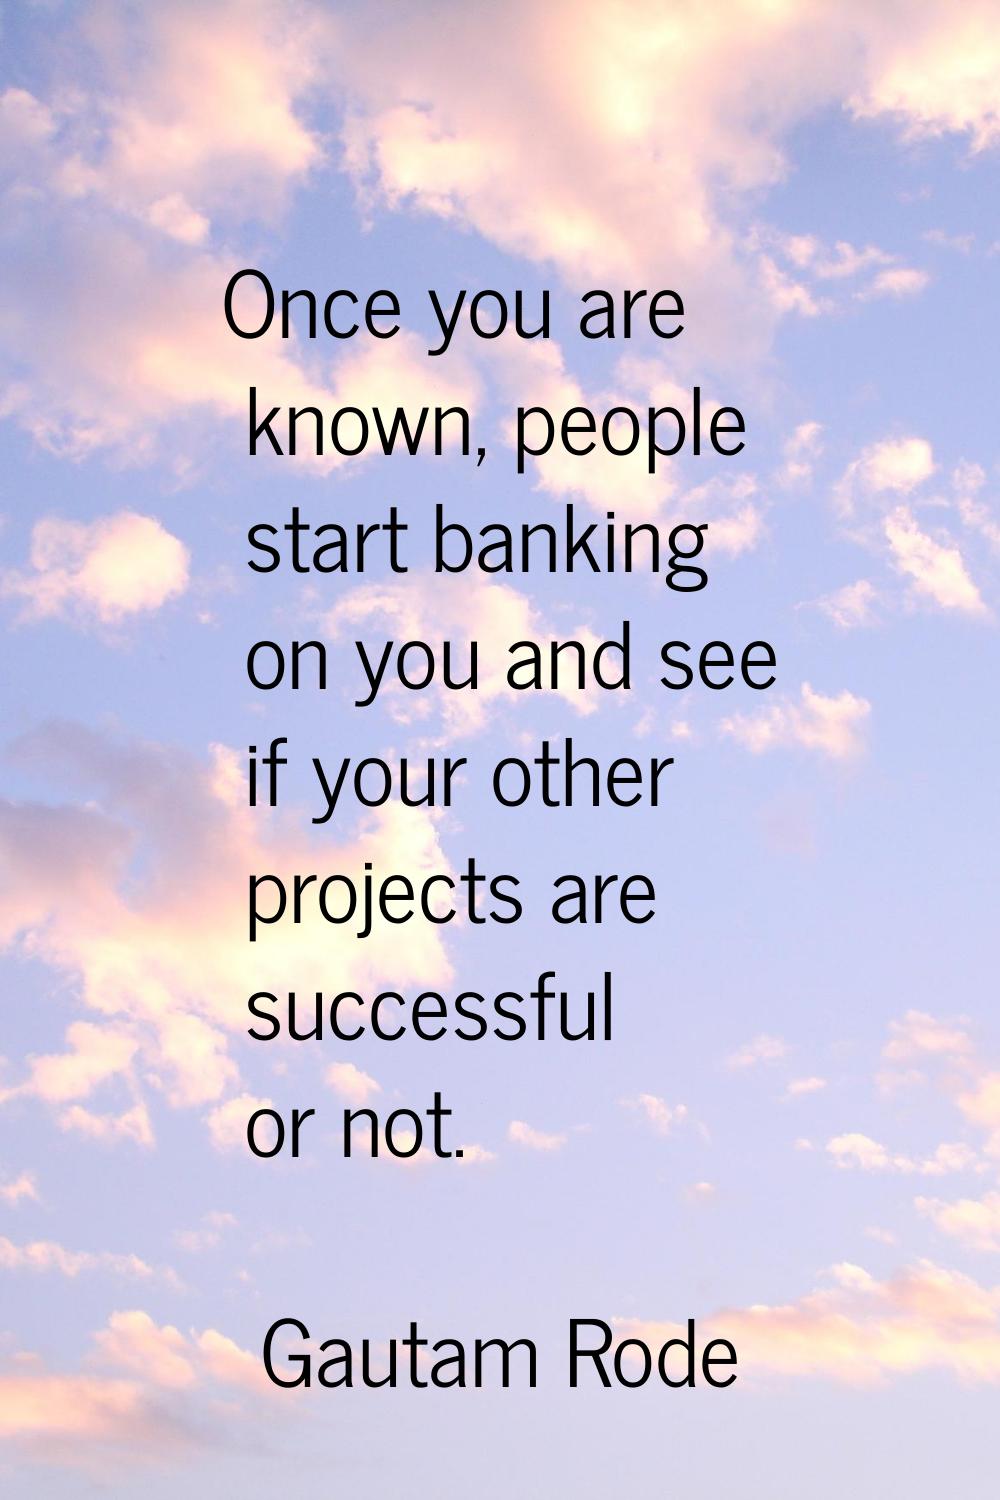 Once you are known, people start banking on you and see if your other projects are successful or no